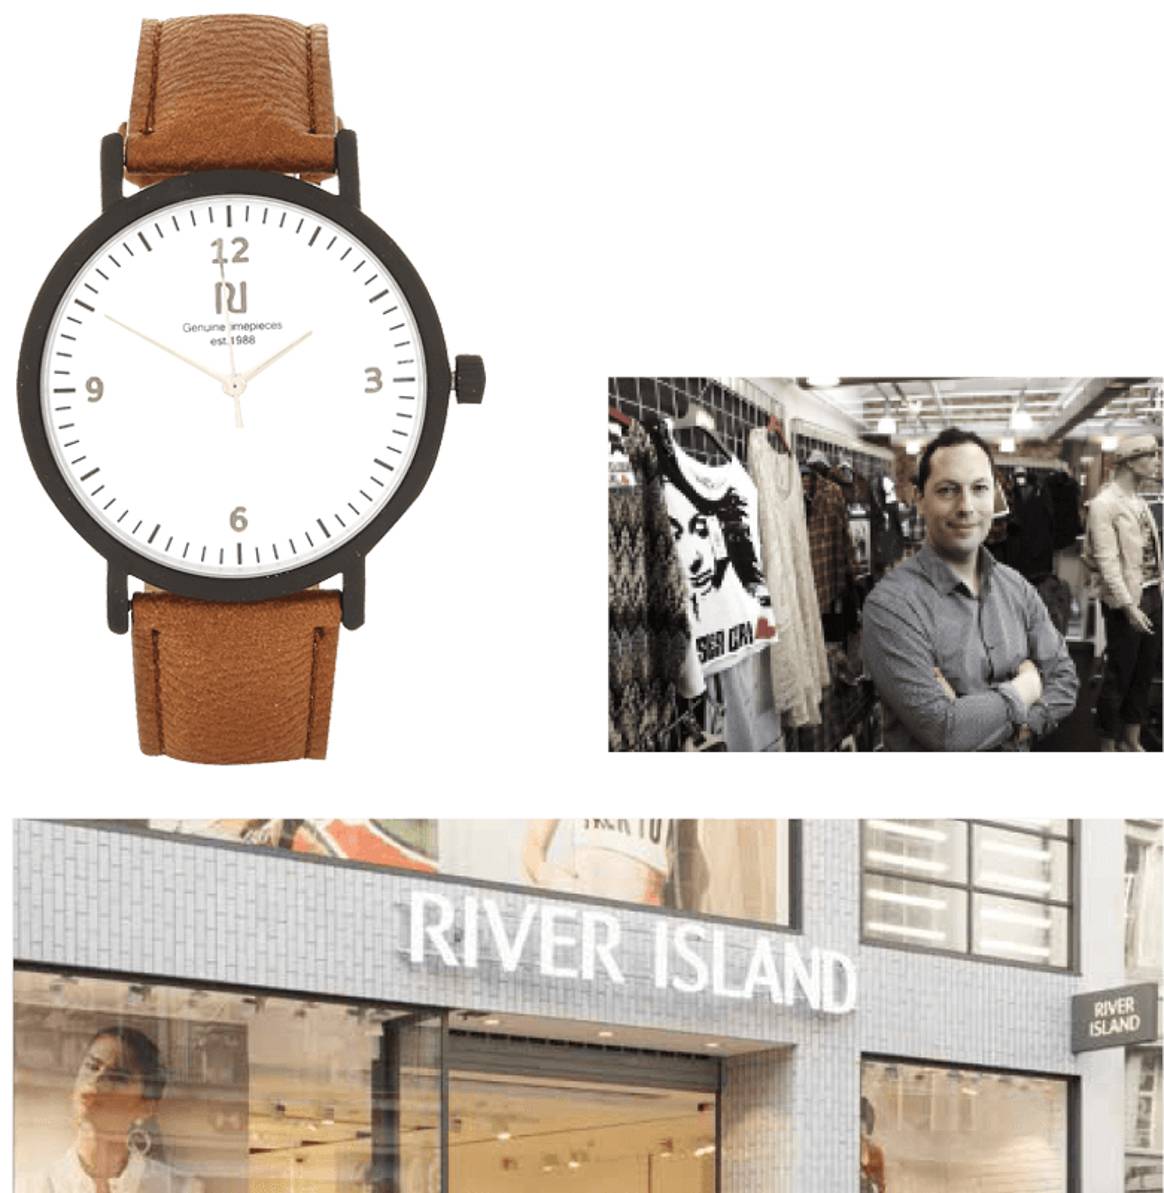 River Island jobs - Working at River Islands (2)